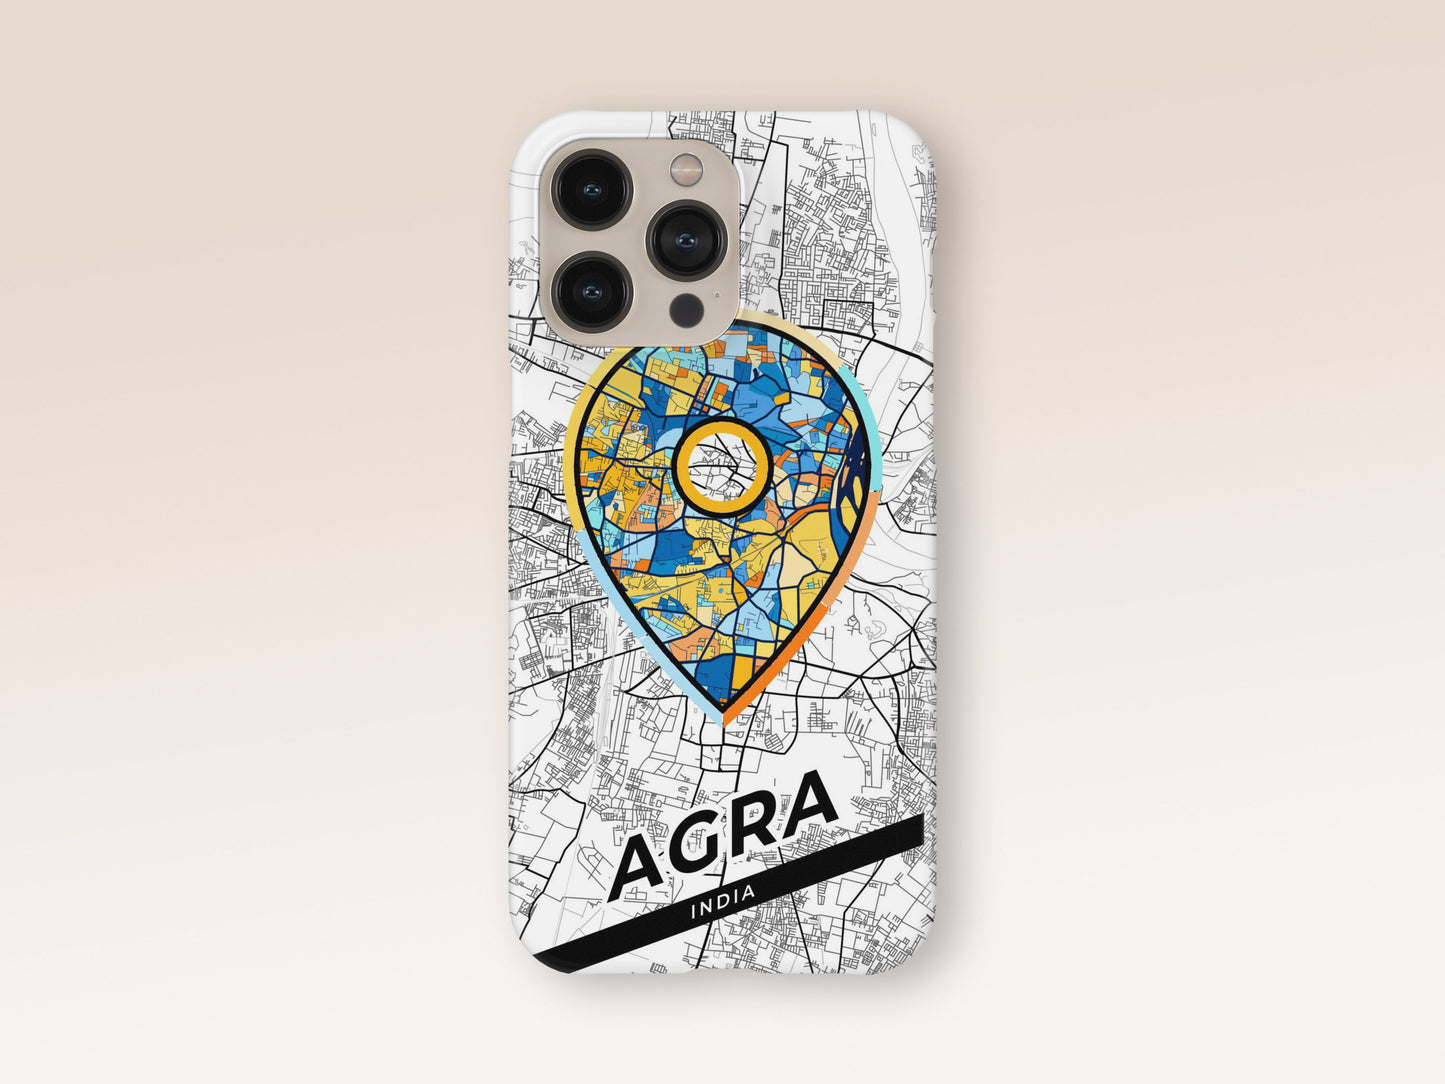 Agra India slim phone case with colorful icon. Birthday, wedding or housewarming gift. Couple match cases. 1